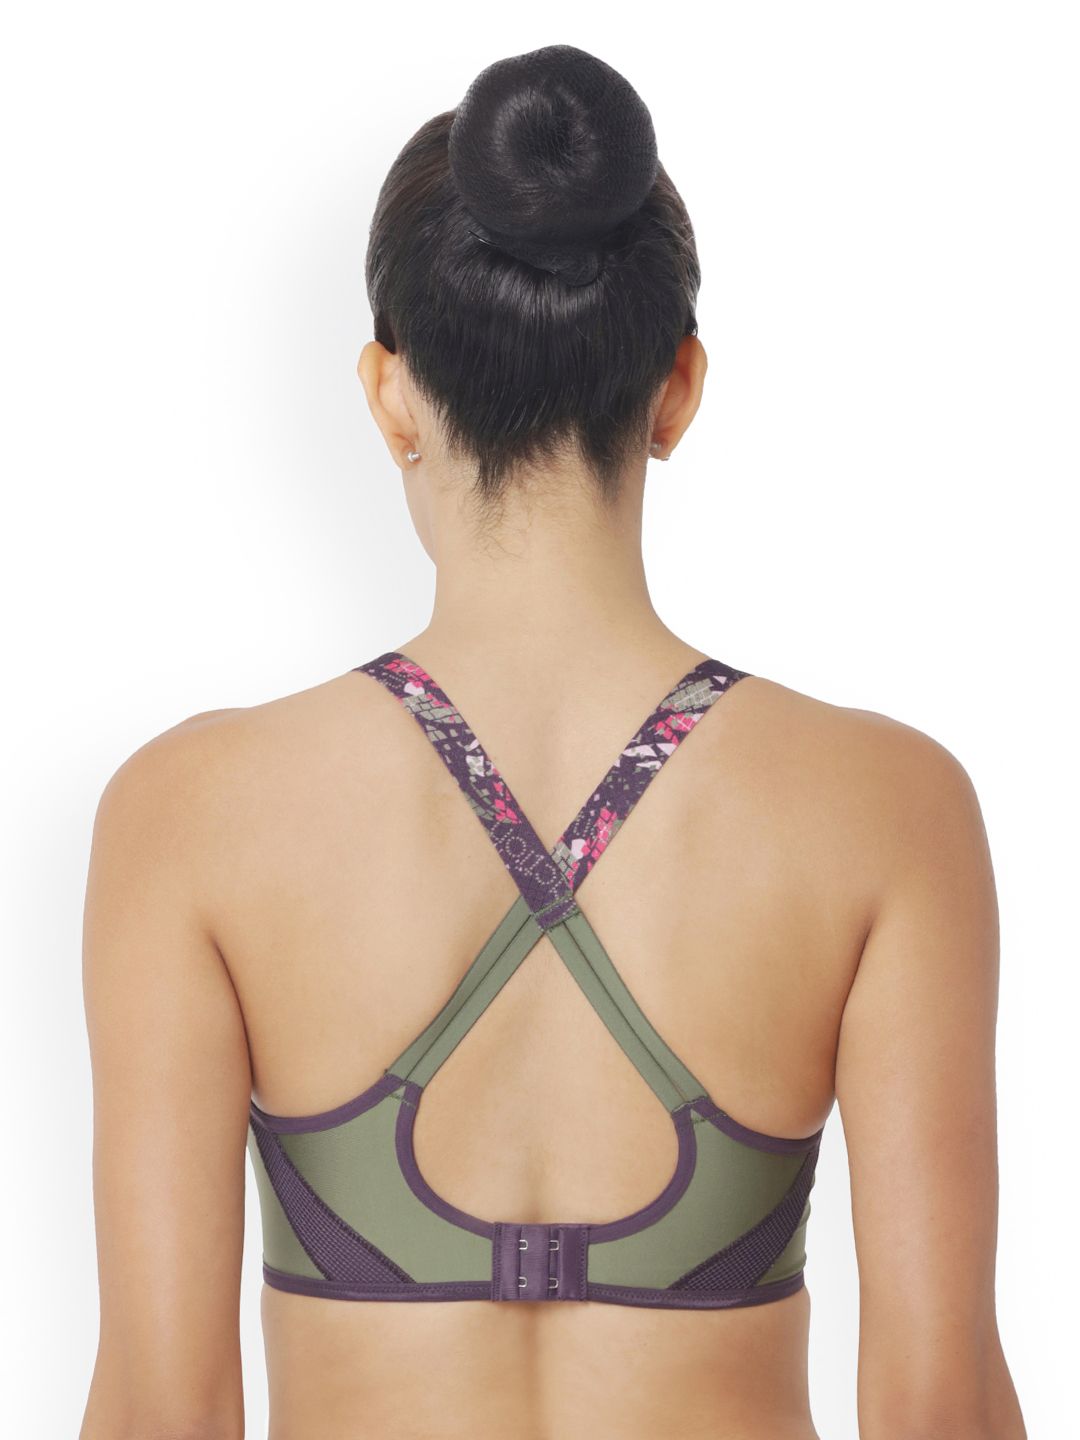 Triumph Purple Triaction Magic Motion Pro Magic-Wired Padded Control Cross-Back Sports Bra Price in India